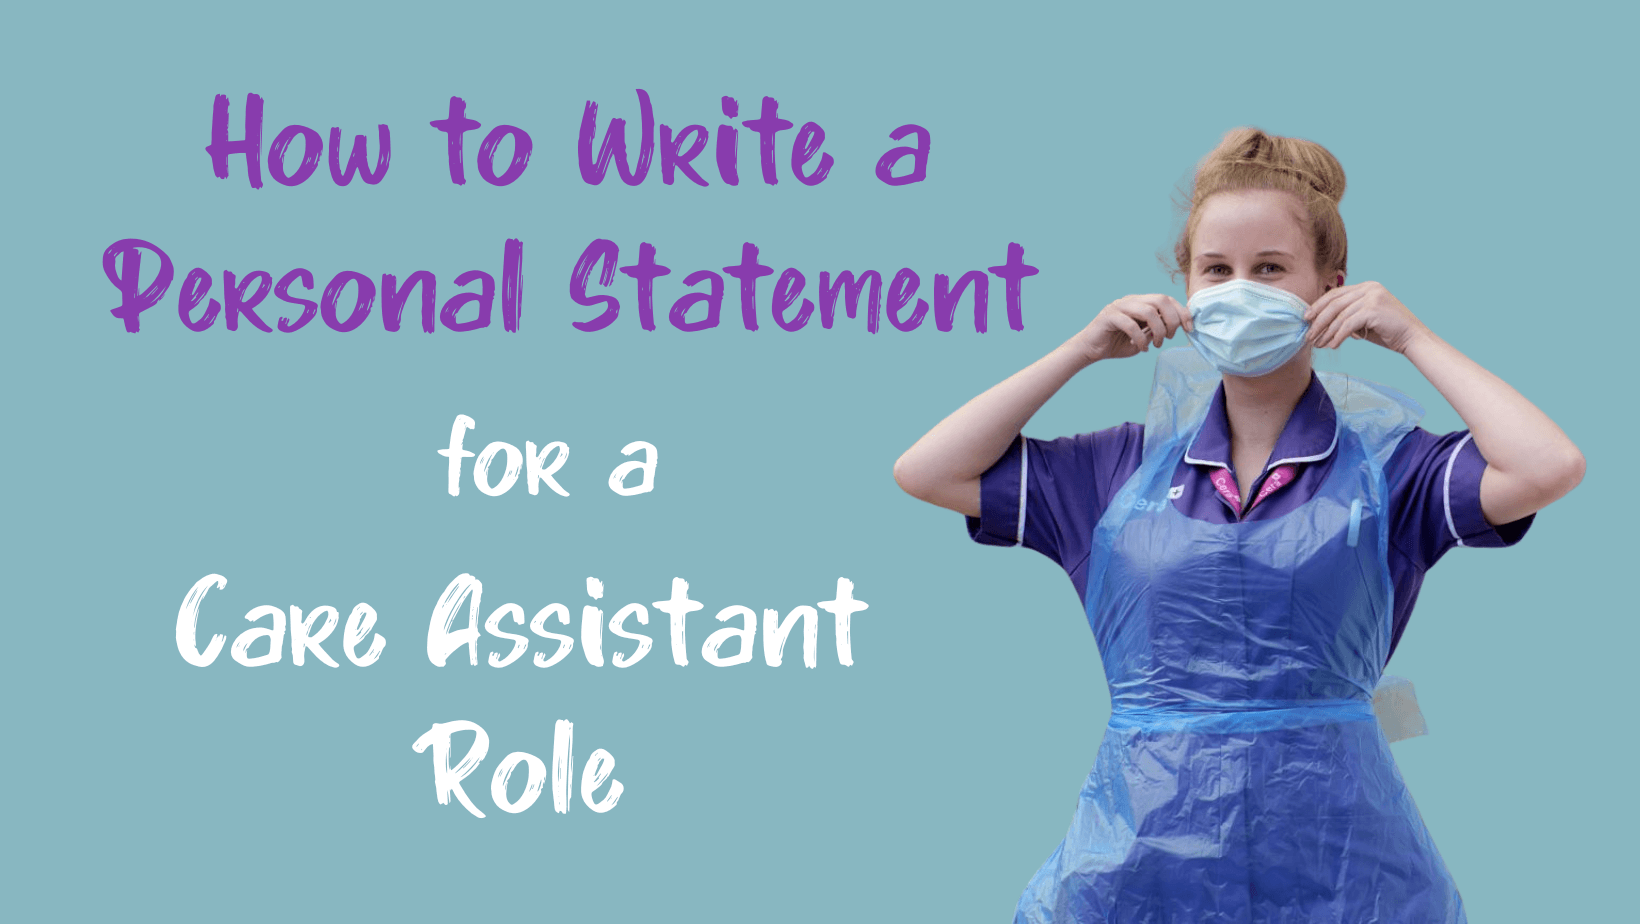 How to write a personal statement for a care assistant role.png